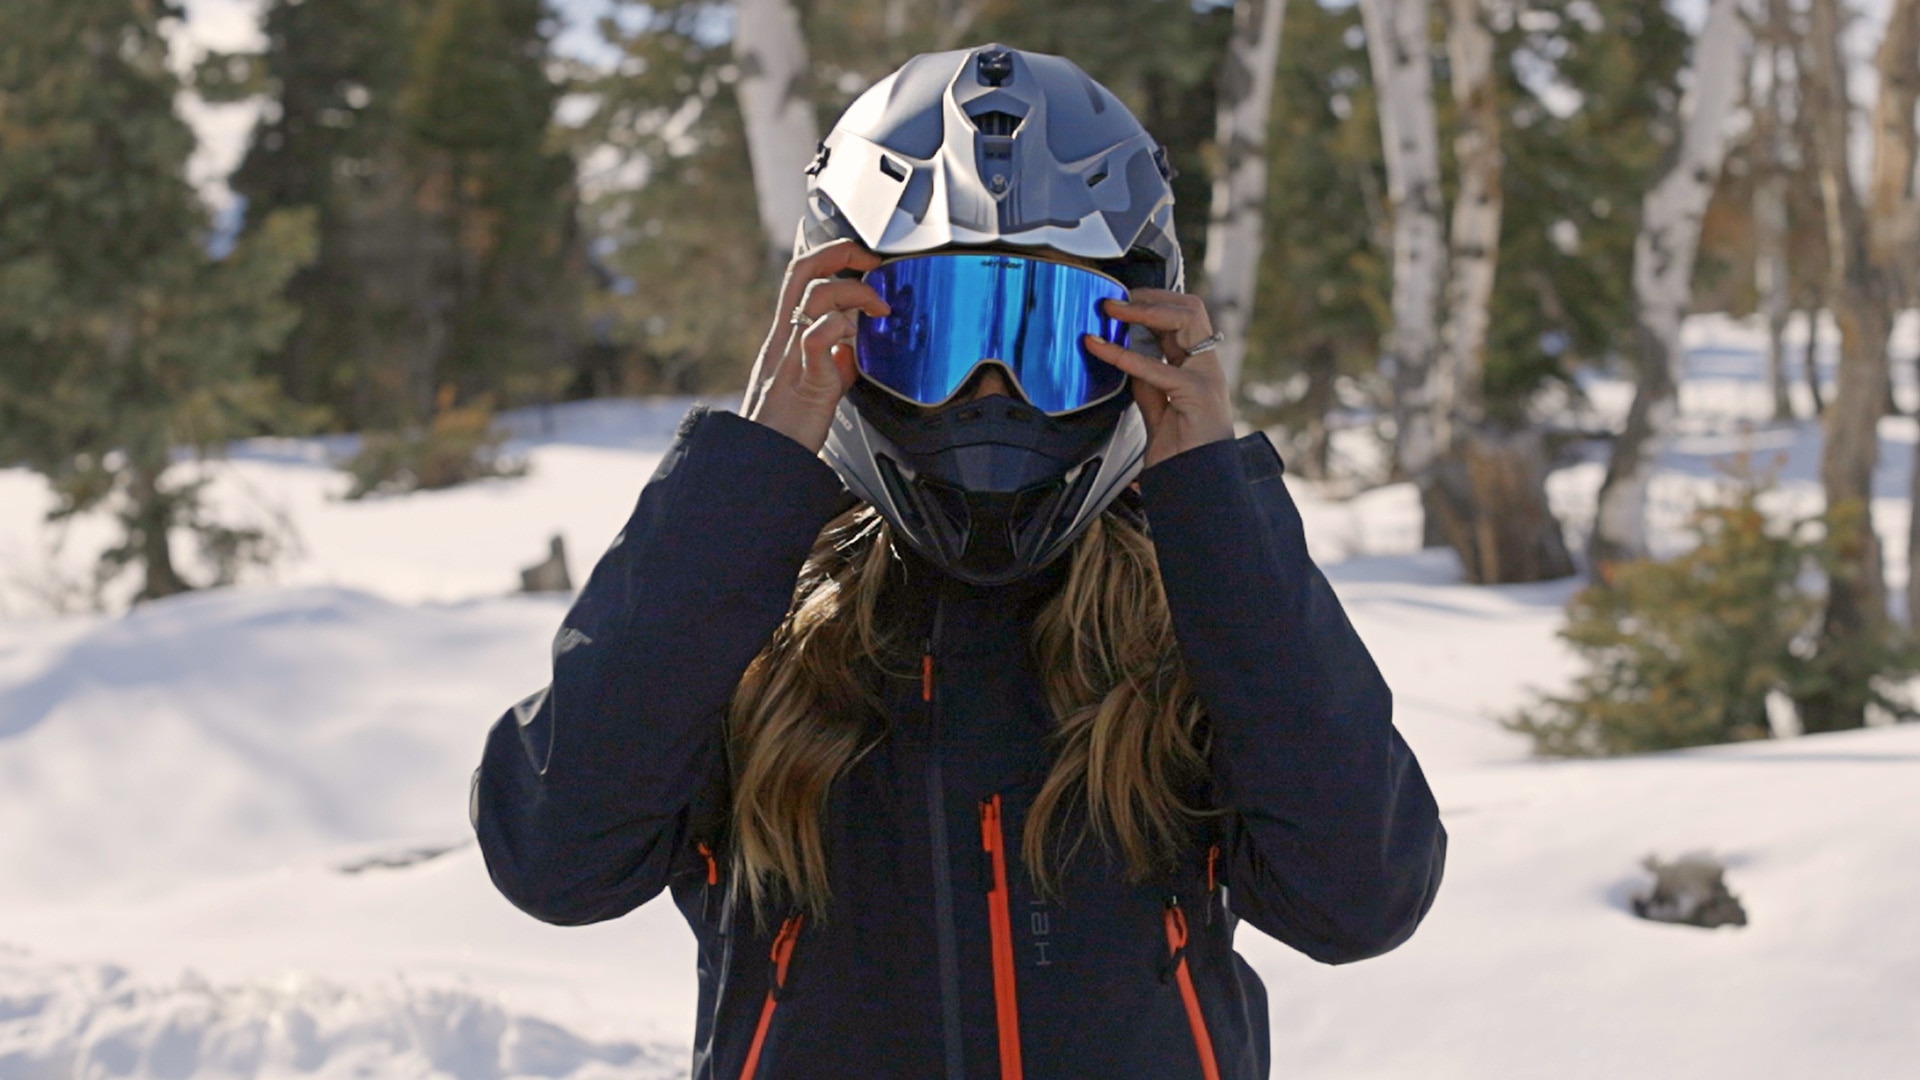 WHAT DO YOU WEAR WHEN BACKCOUNTRY SNOWMOBILING?